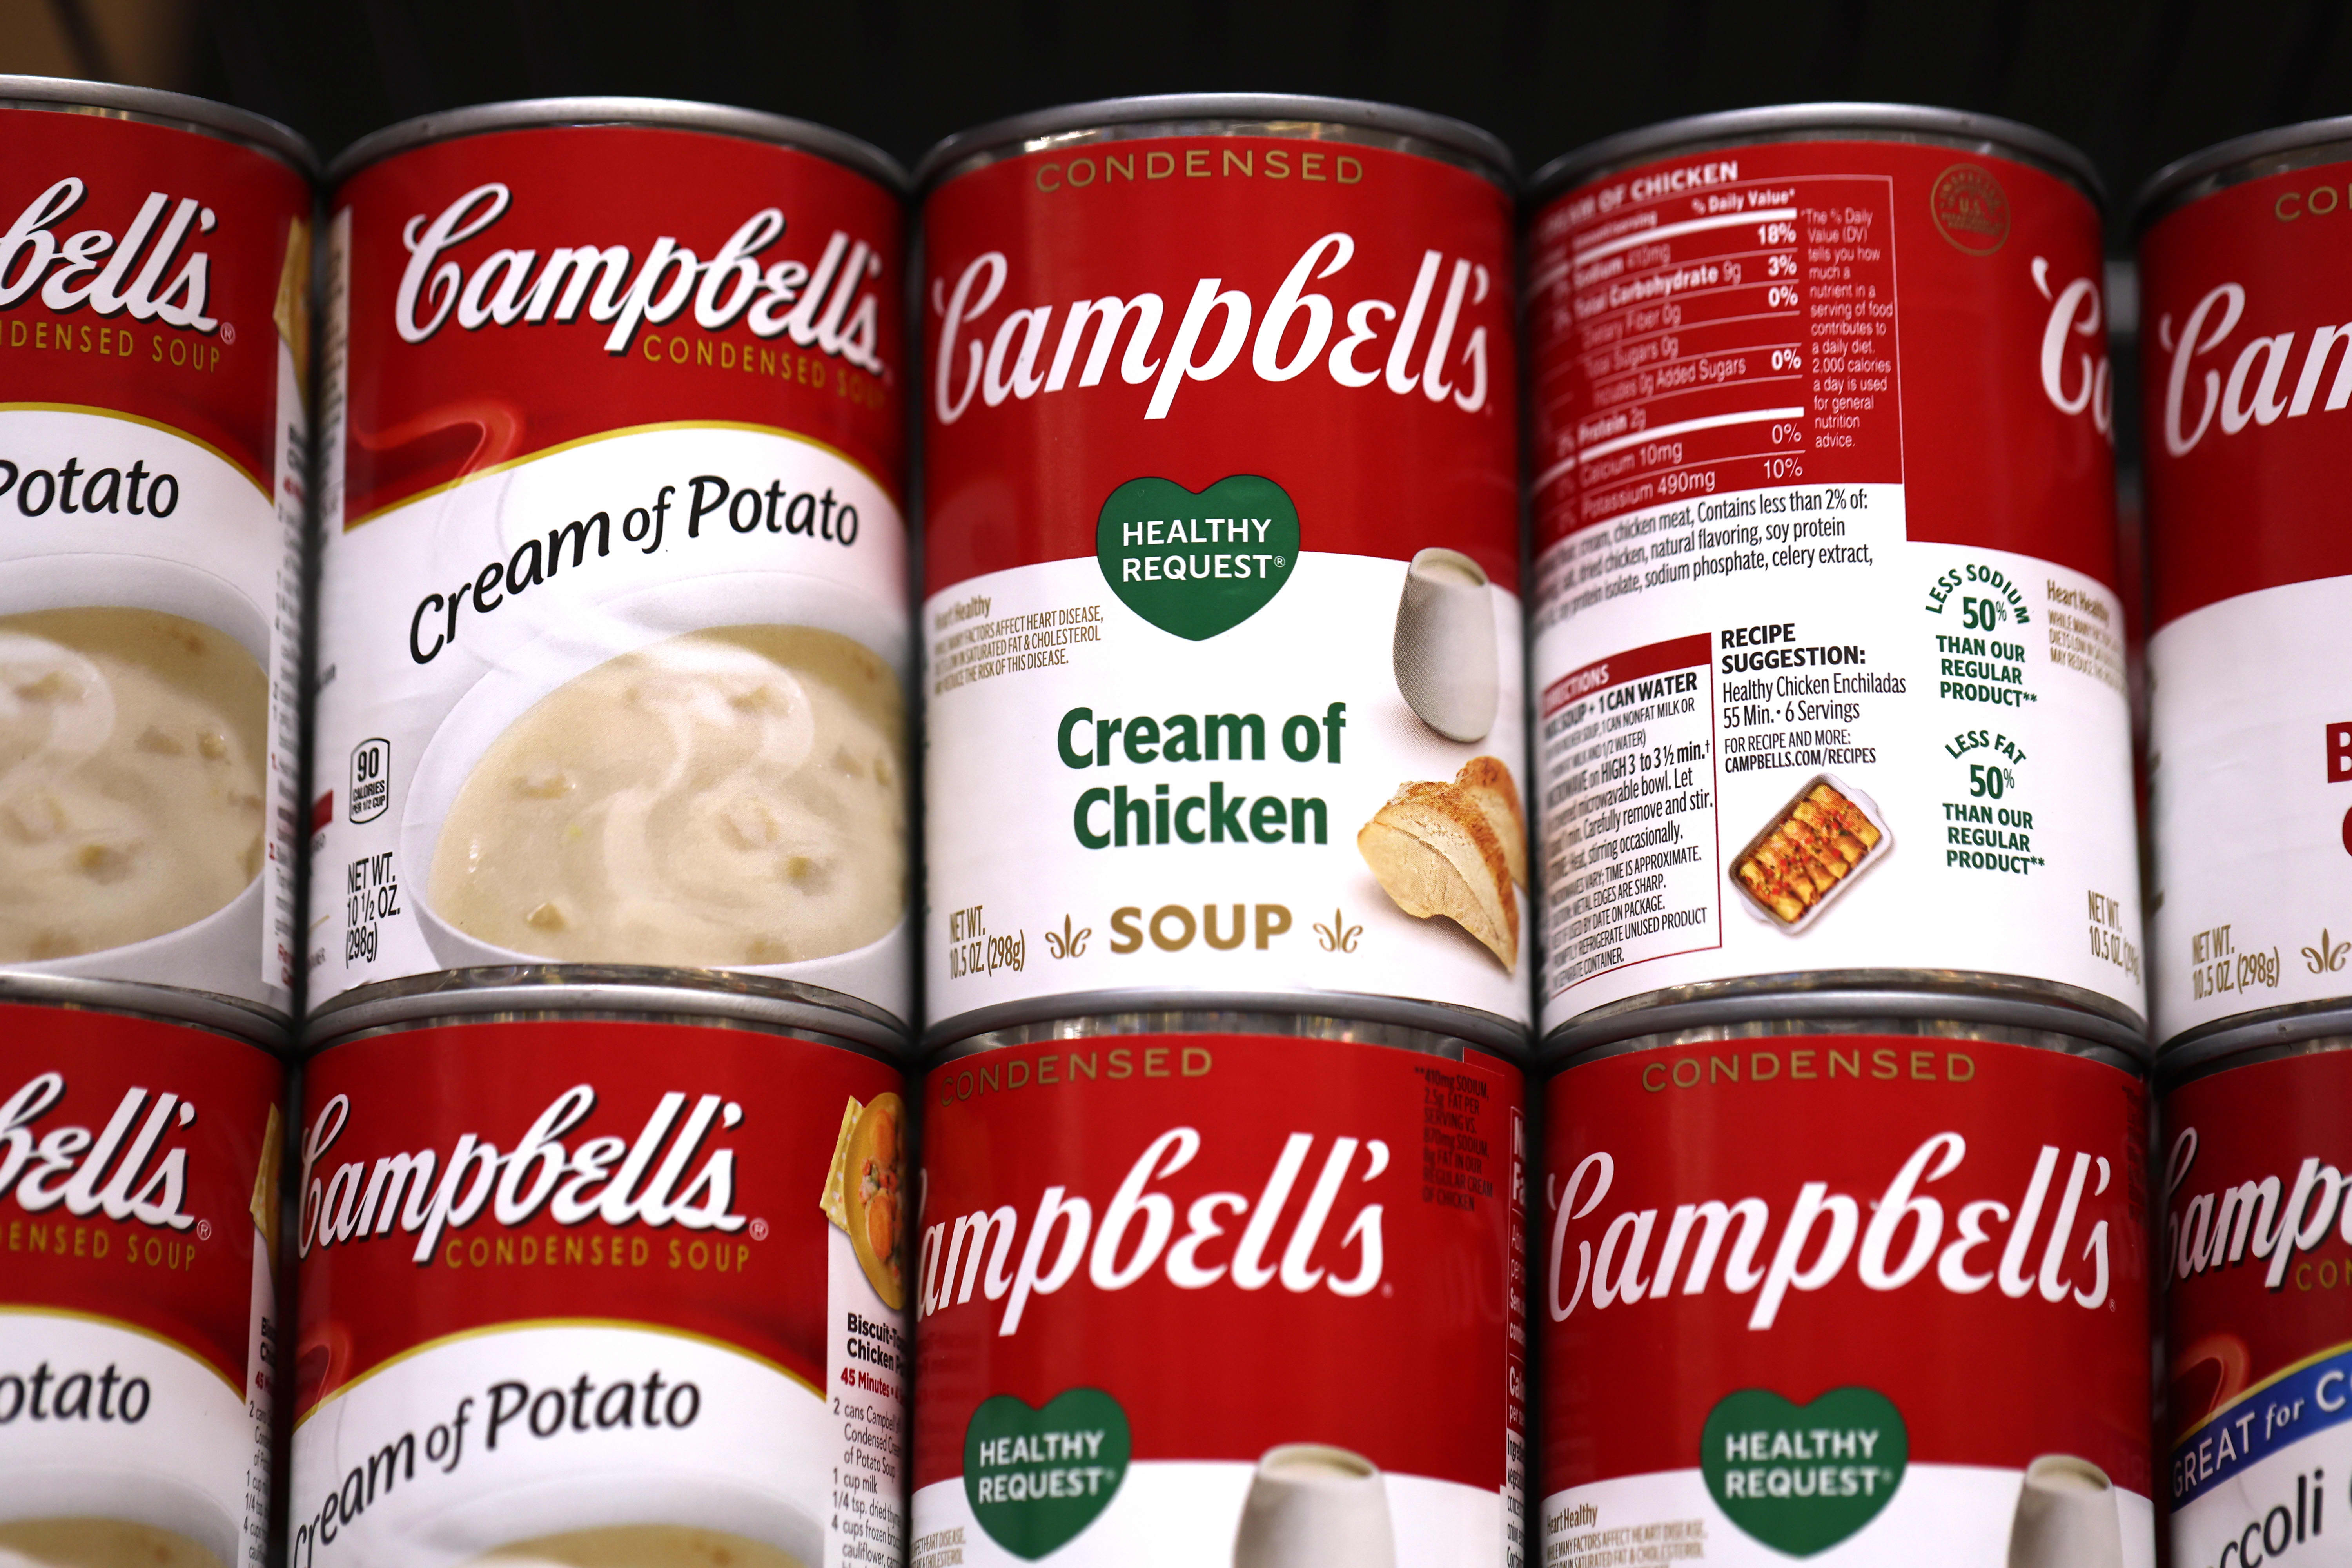 Stocks making the biggest moves premarket: Campbell Soup, Express, Thor Industries and others